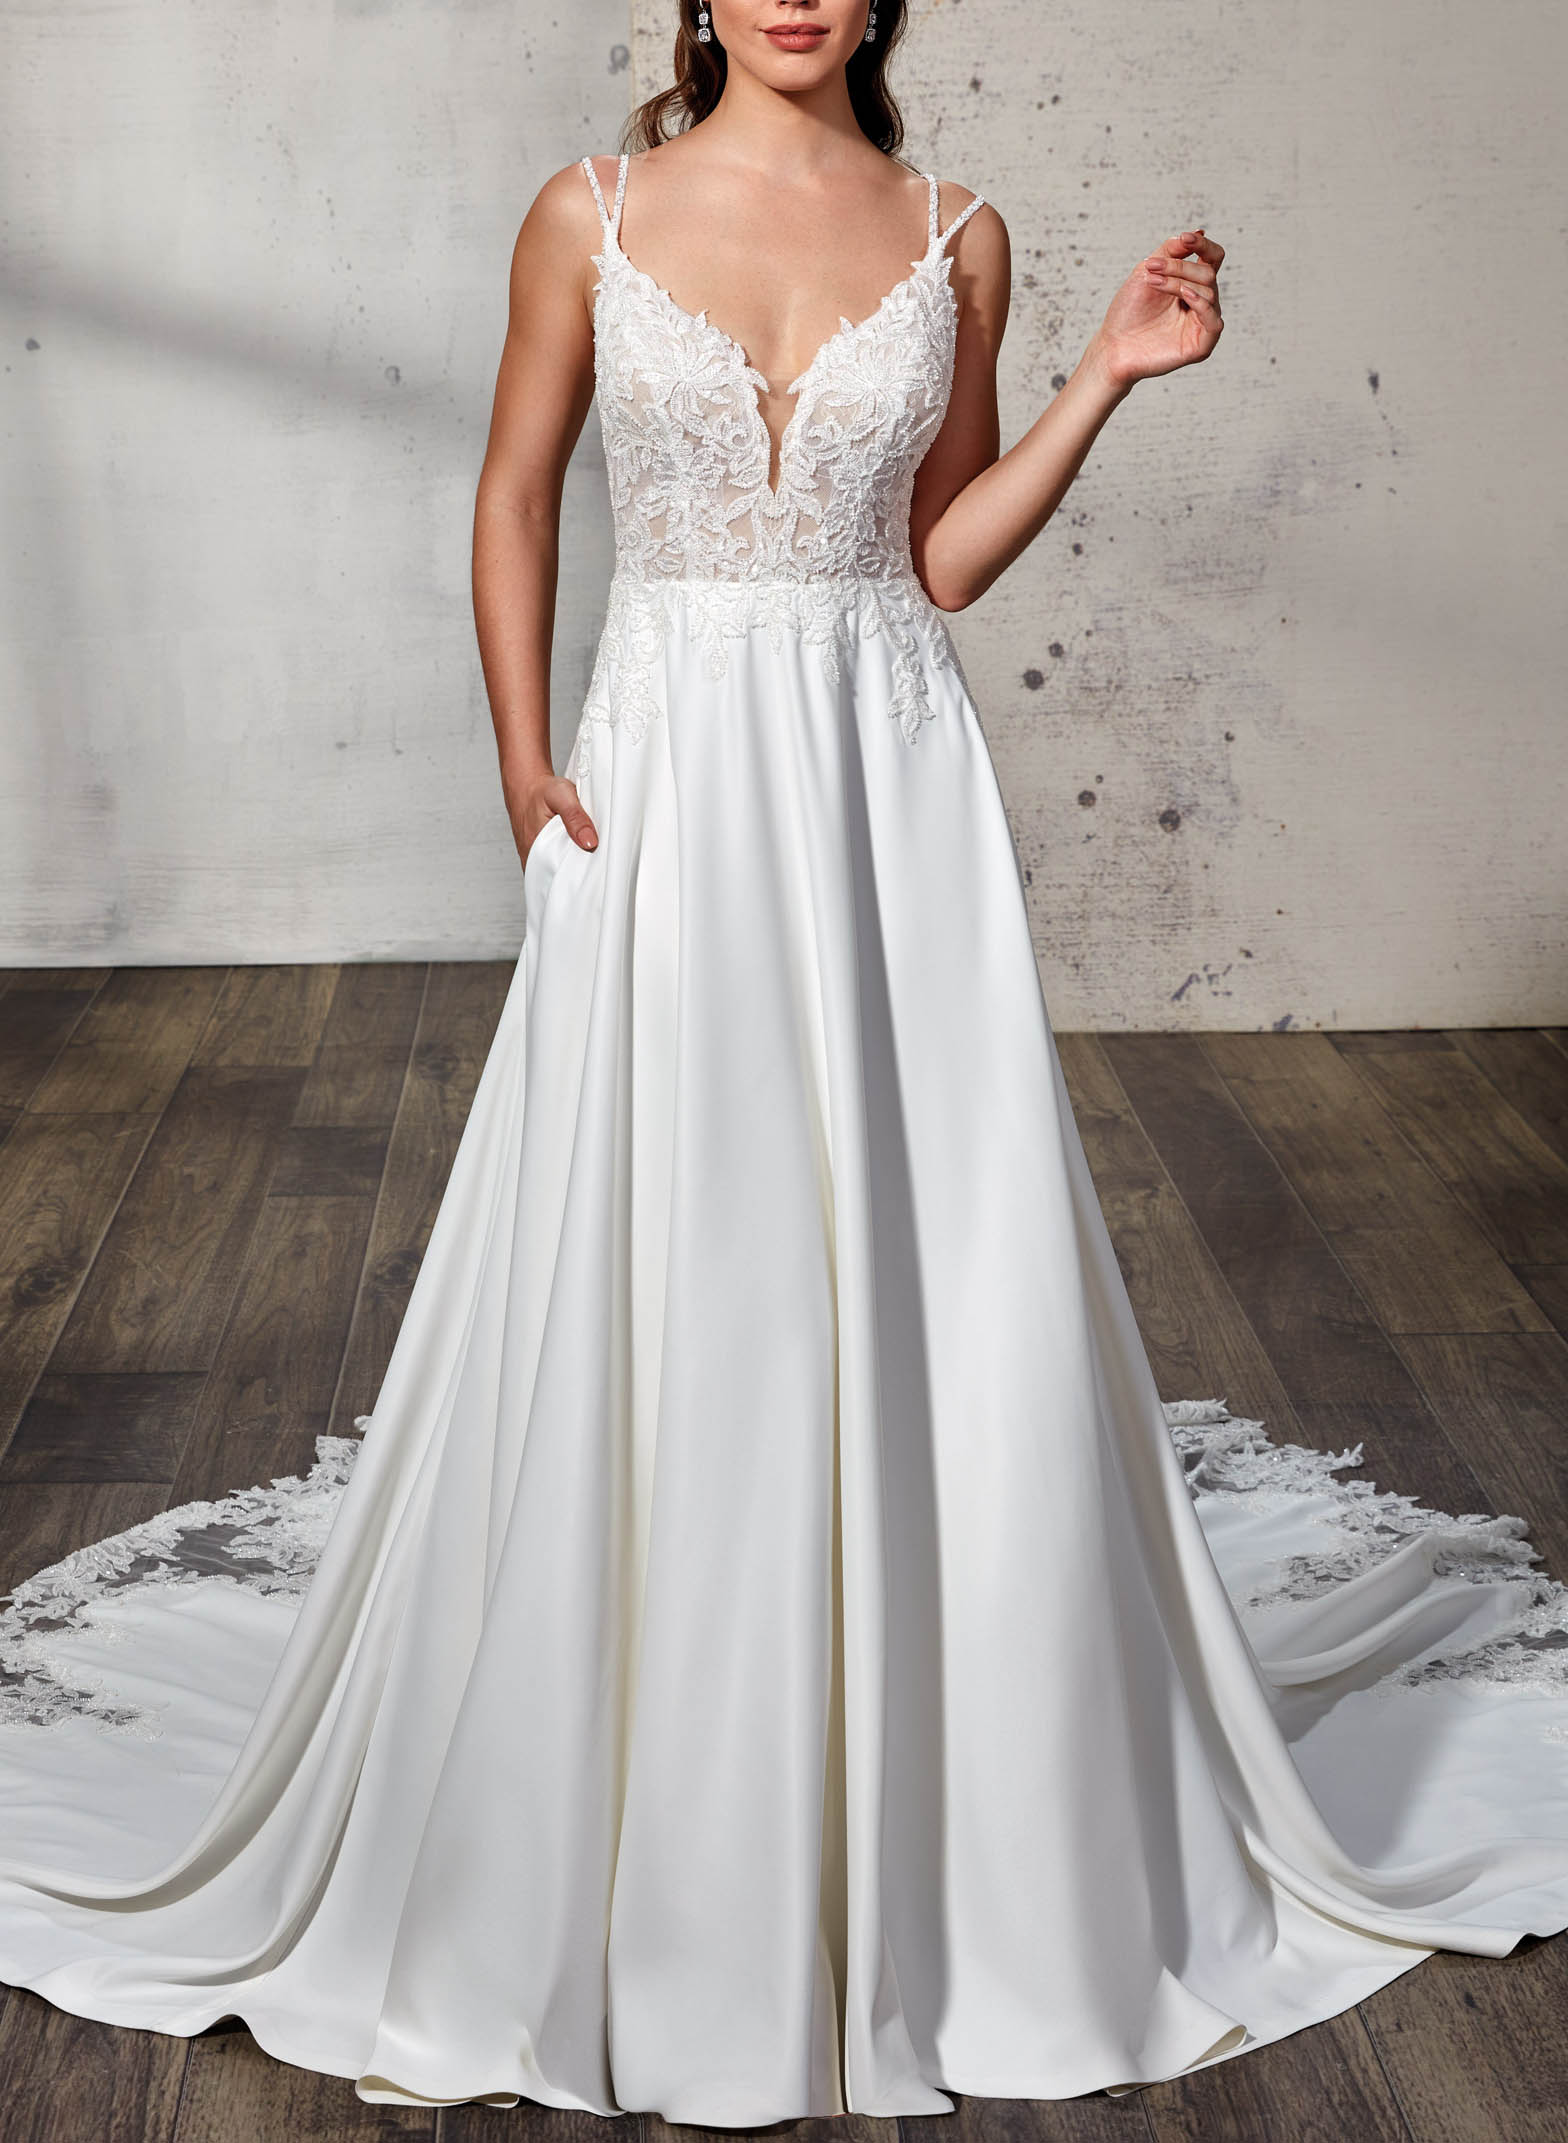 Lace Open Back A-Line Wedding Dresses With Pockets